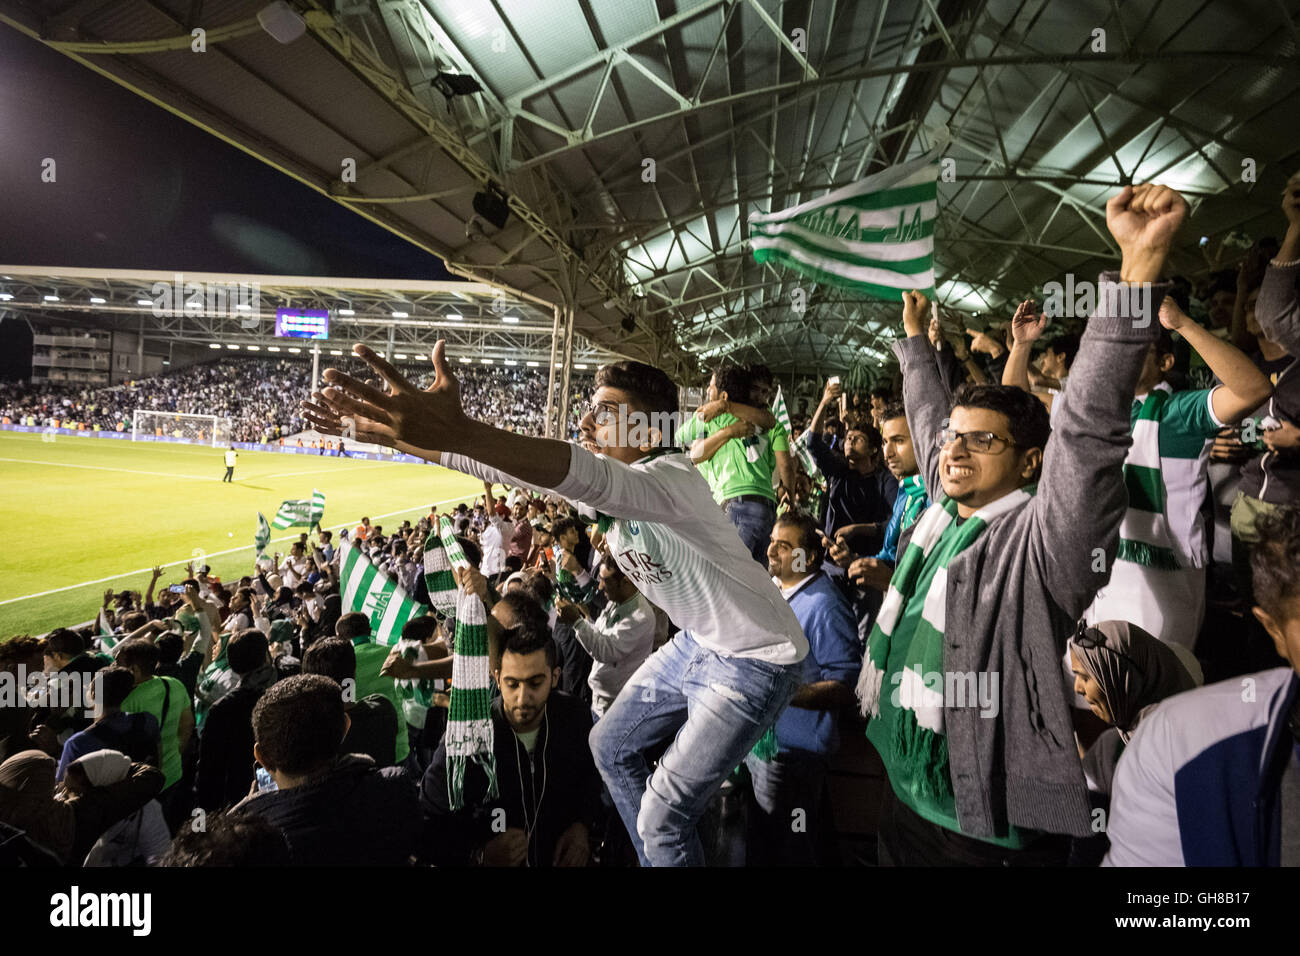 London, UK. 8th August, 2016. Saudis and other middle-eastern fans watch teams  Al-Ahli vs Al-Hilal during the Saudi Super Cup match finals at Craven  Cottage, Fulham Football Club Credit: Guy Corbishley/Alamy Live